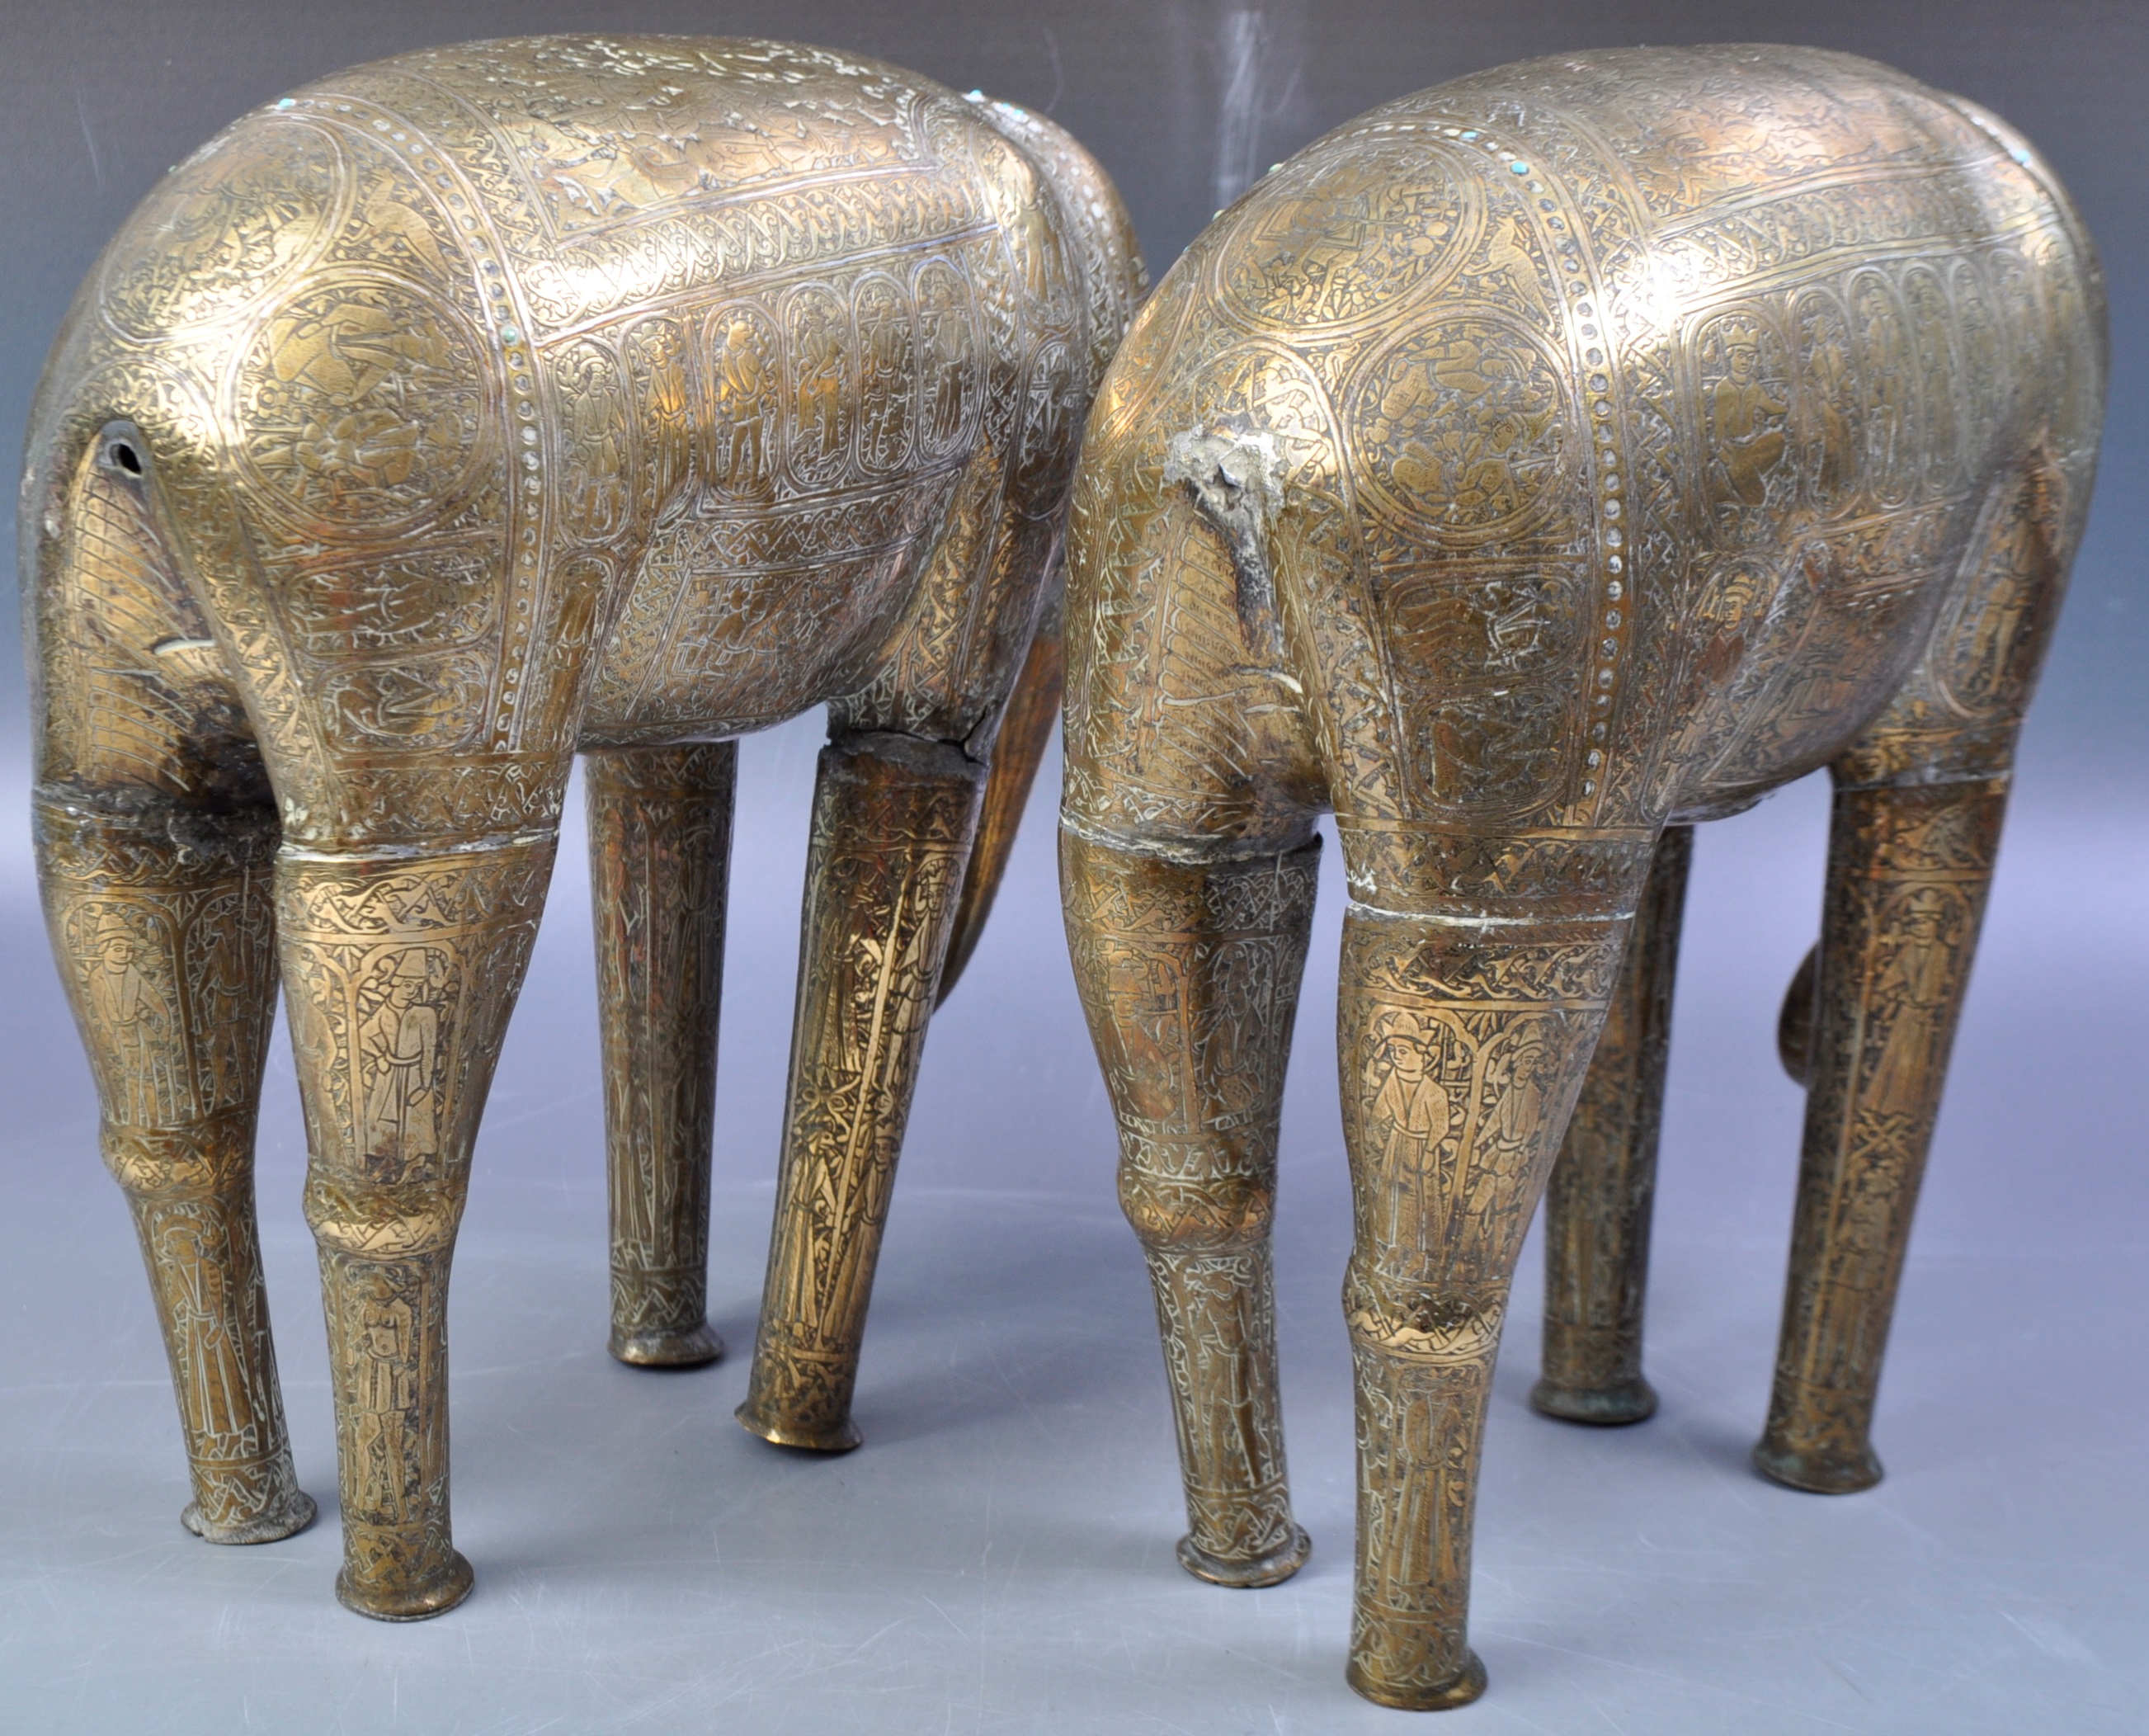 19TH CENTURY INDIAN / MIDDLE EASTERN FINELY ENGRAVED BRASS ELEPHANTS - Image 5 of 8